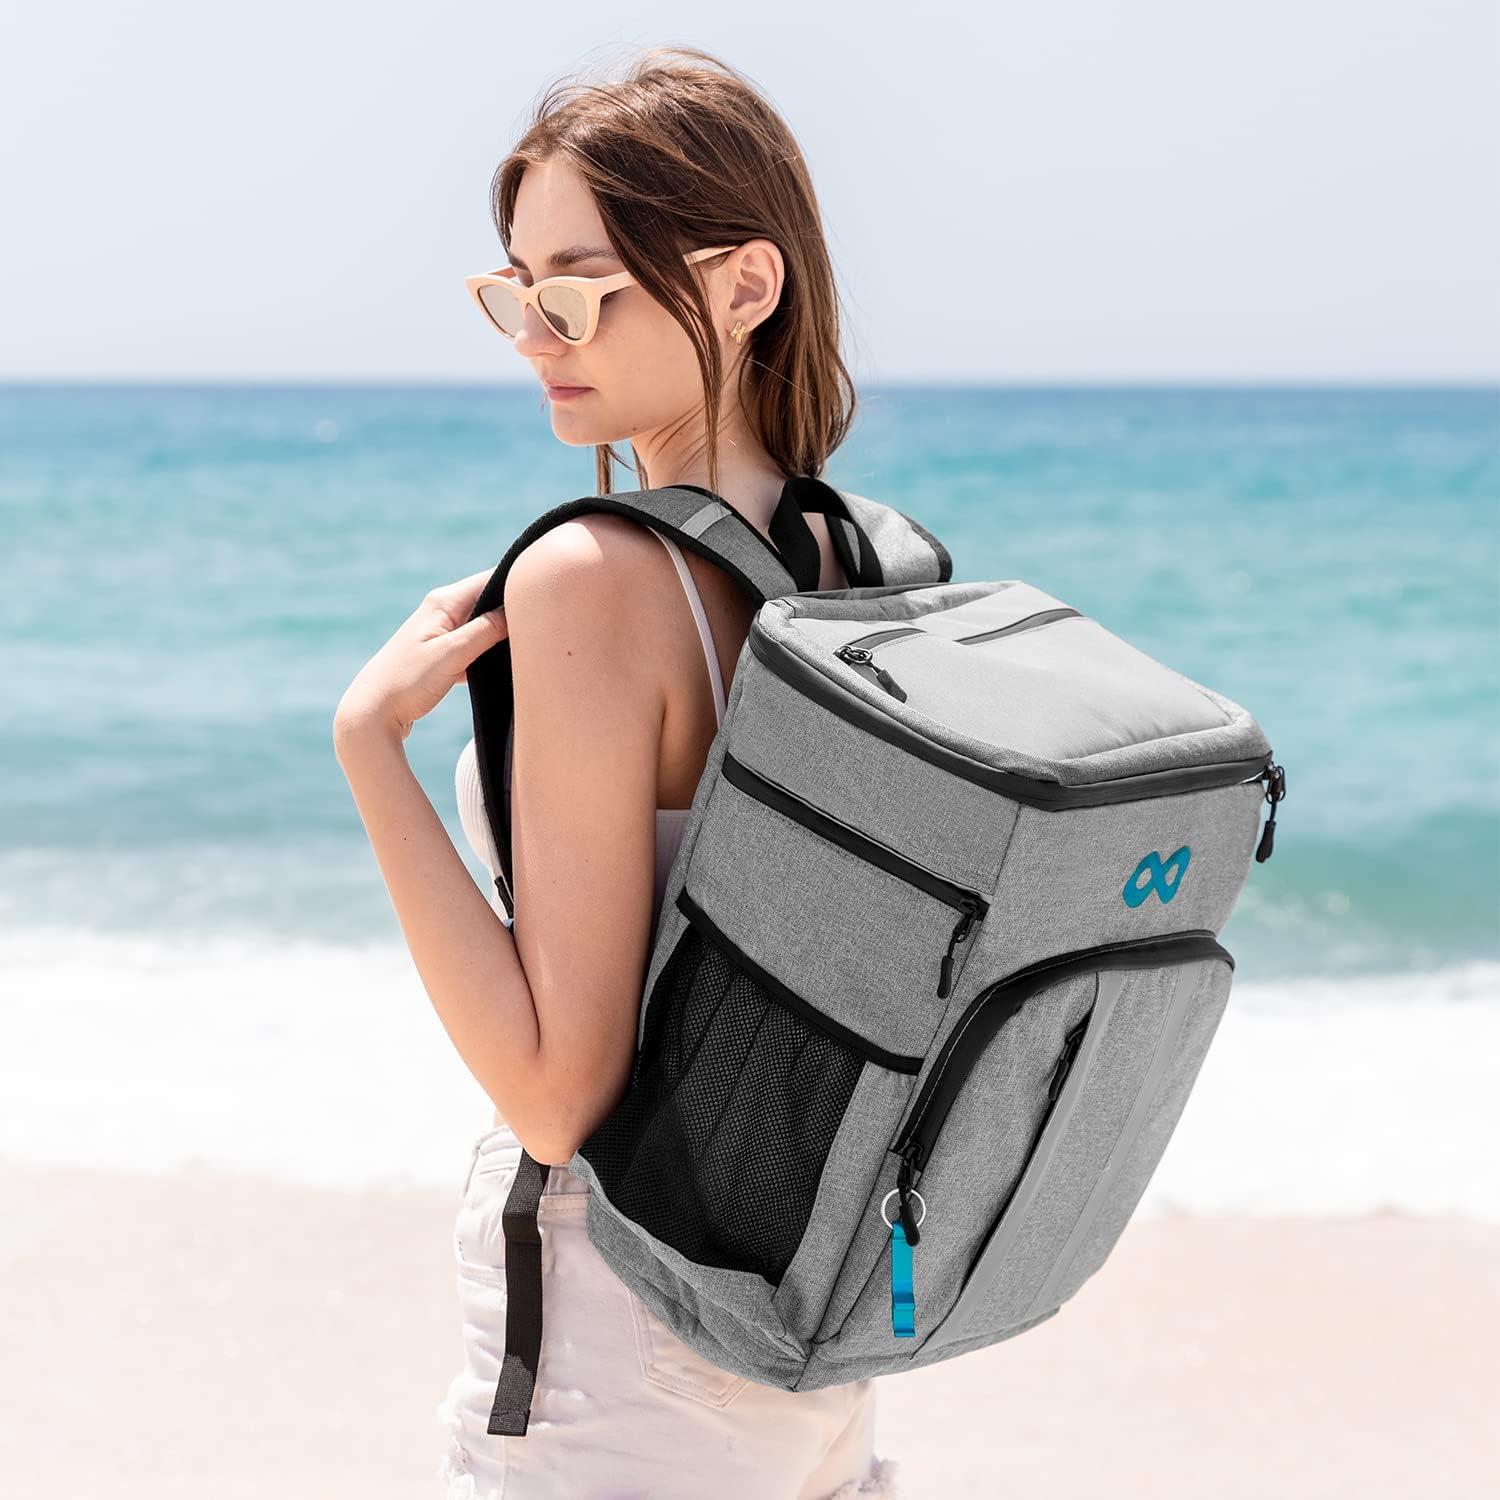 The Ultimate 54 Cans Backpack Cooler Companion - Everlasting Comfort Beach  Cooler Backpack Insulated Leak Proof - Perfect Soft Cooler Bag for Picnic,  Camping, & Beach Accessories